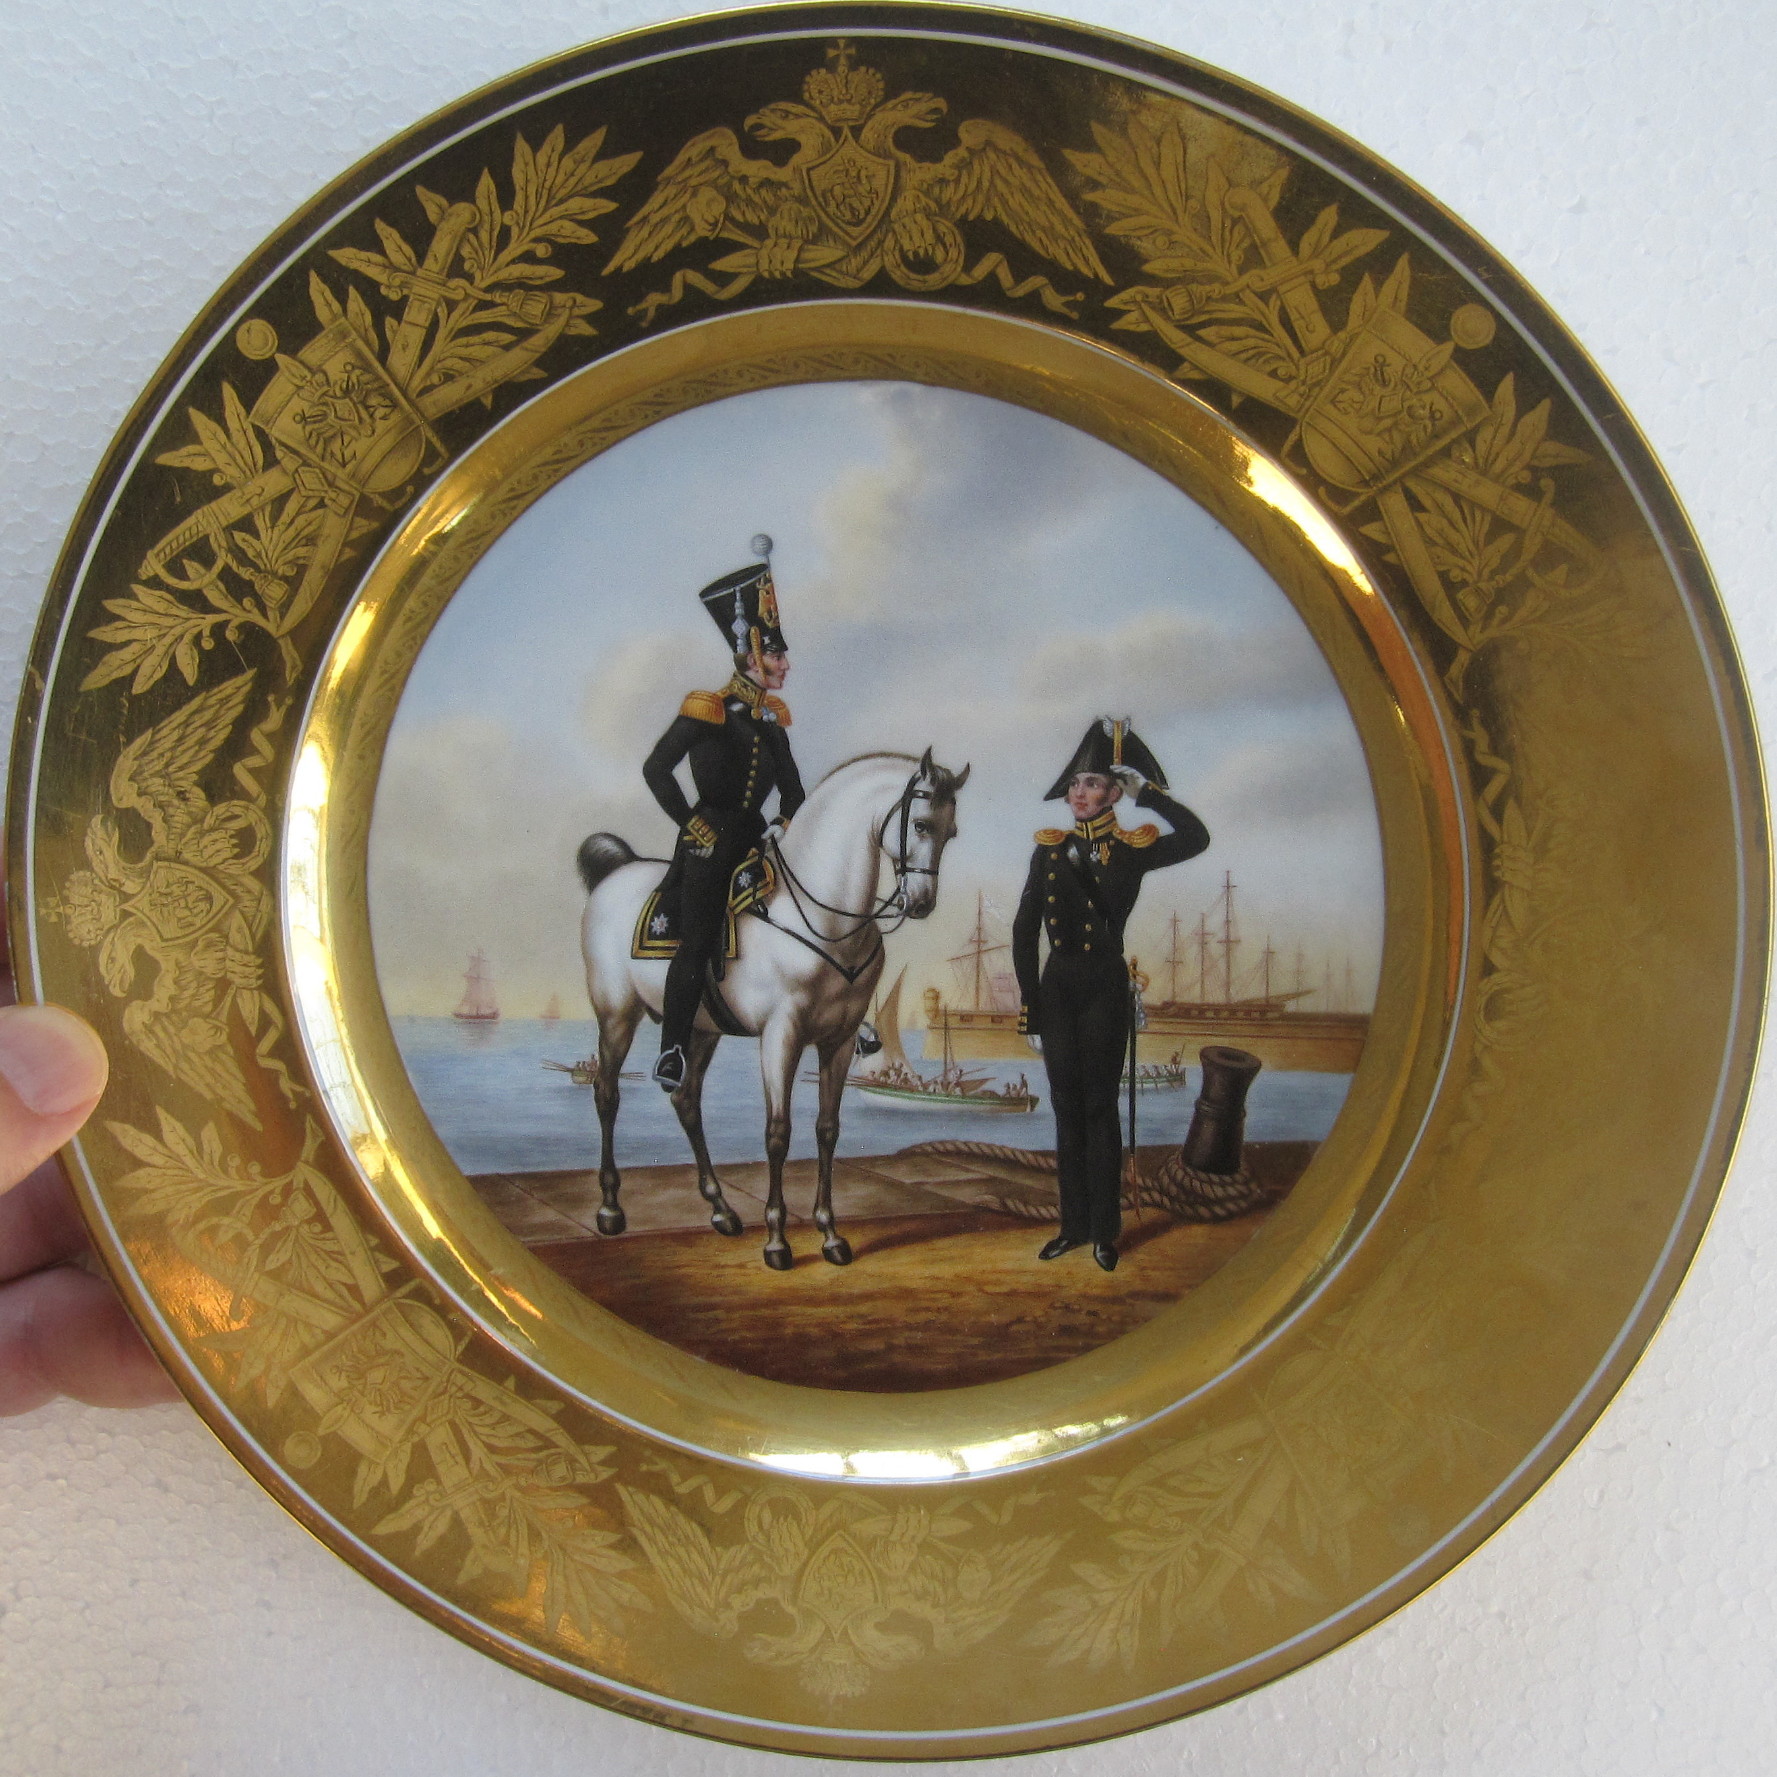 Russian Imperial Porcelain military plate depicting Equipage